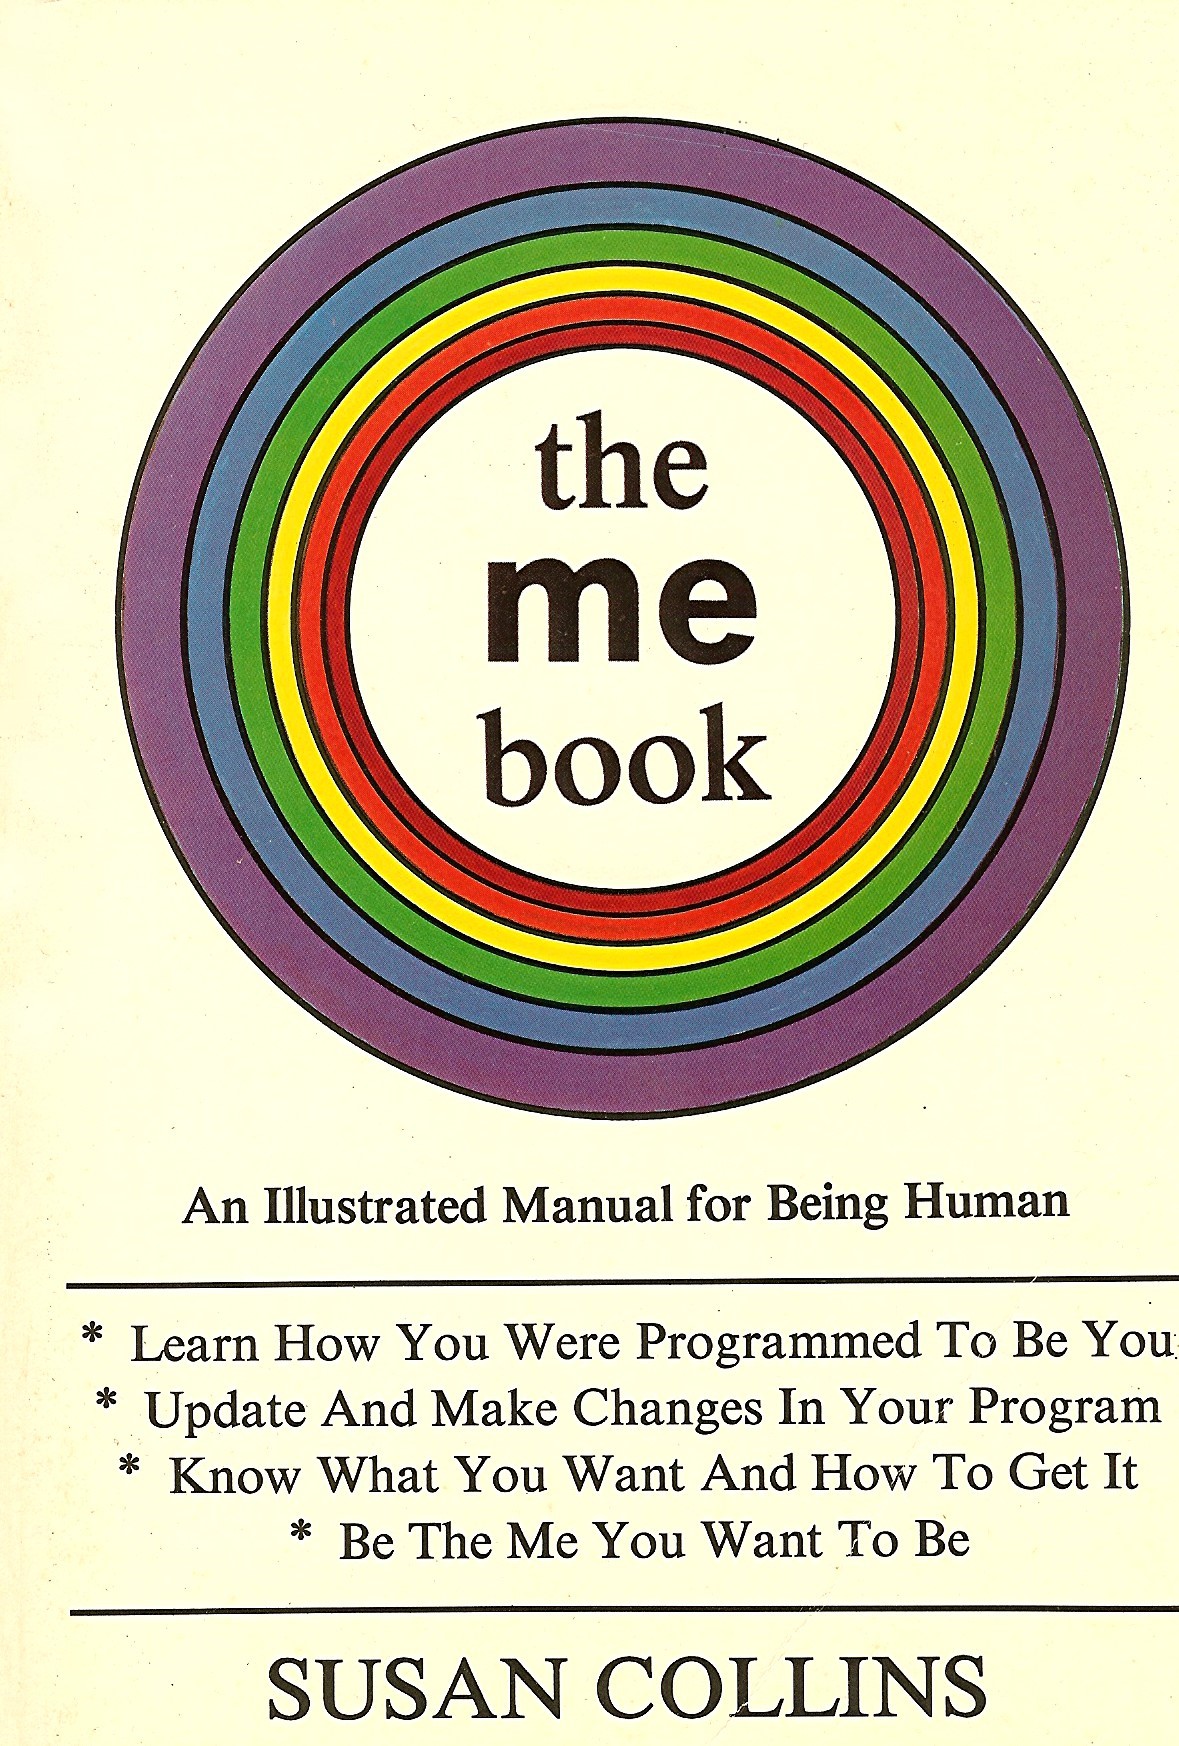 The Me Book by Susan Ford Collins